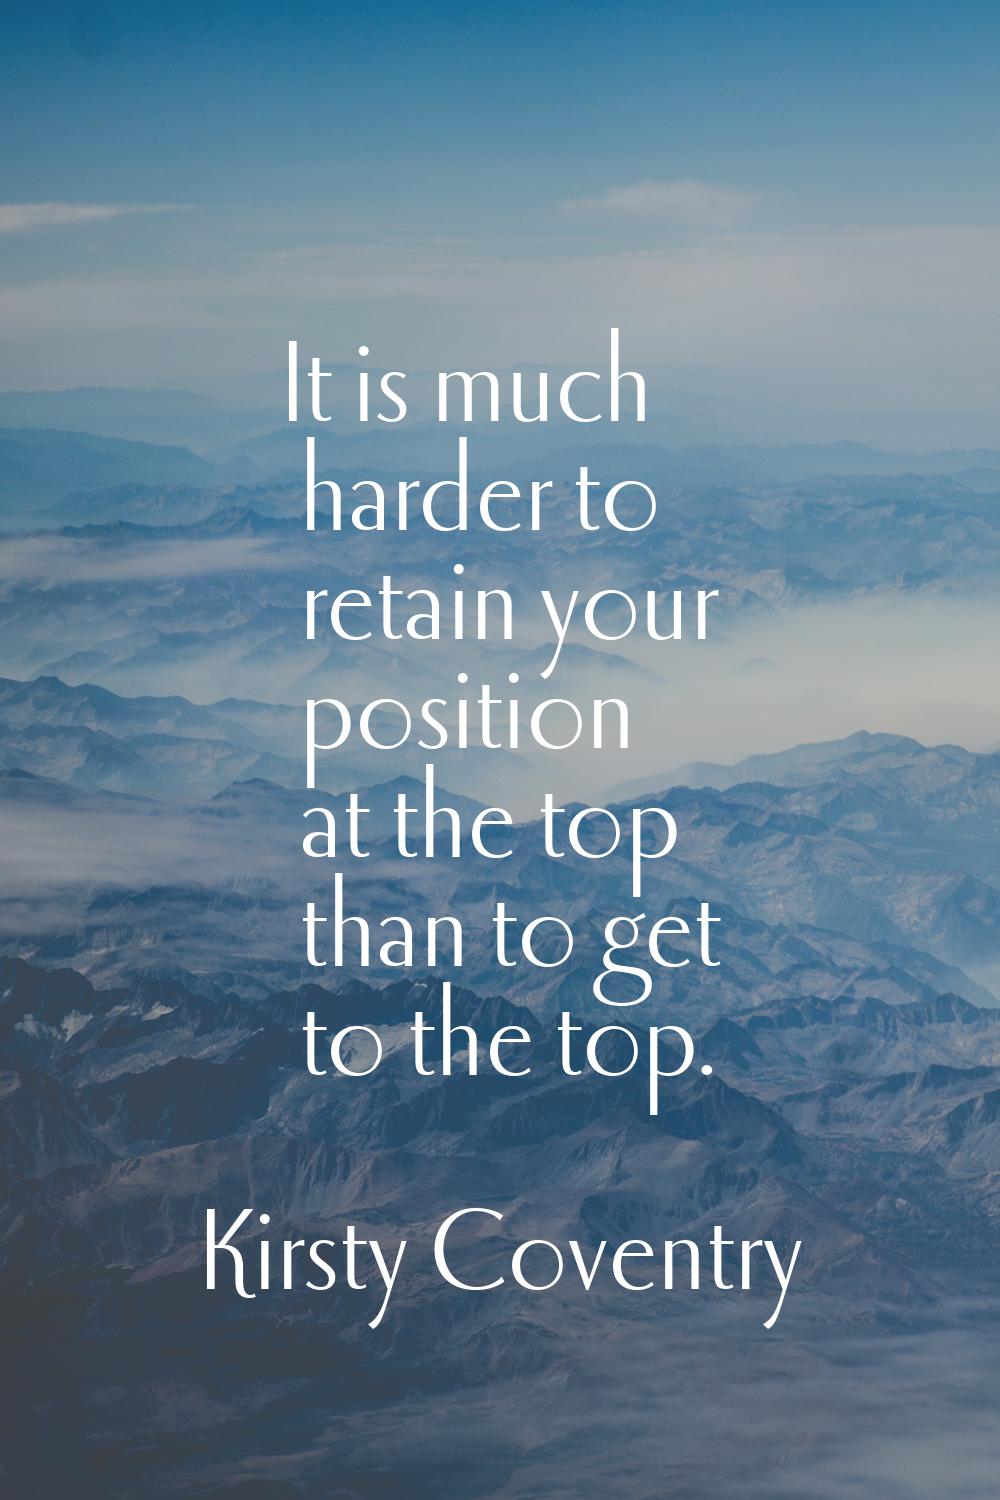 It is much harder to retain your position at the top than to get to the top.